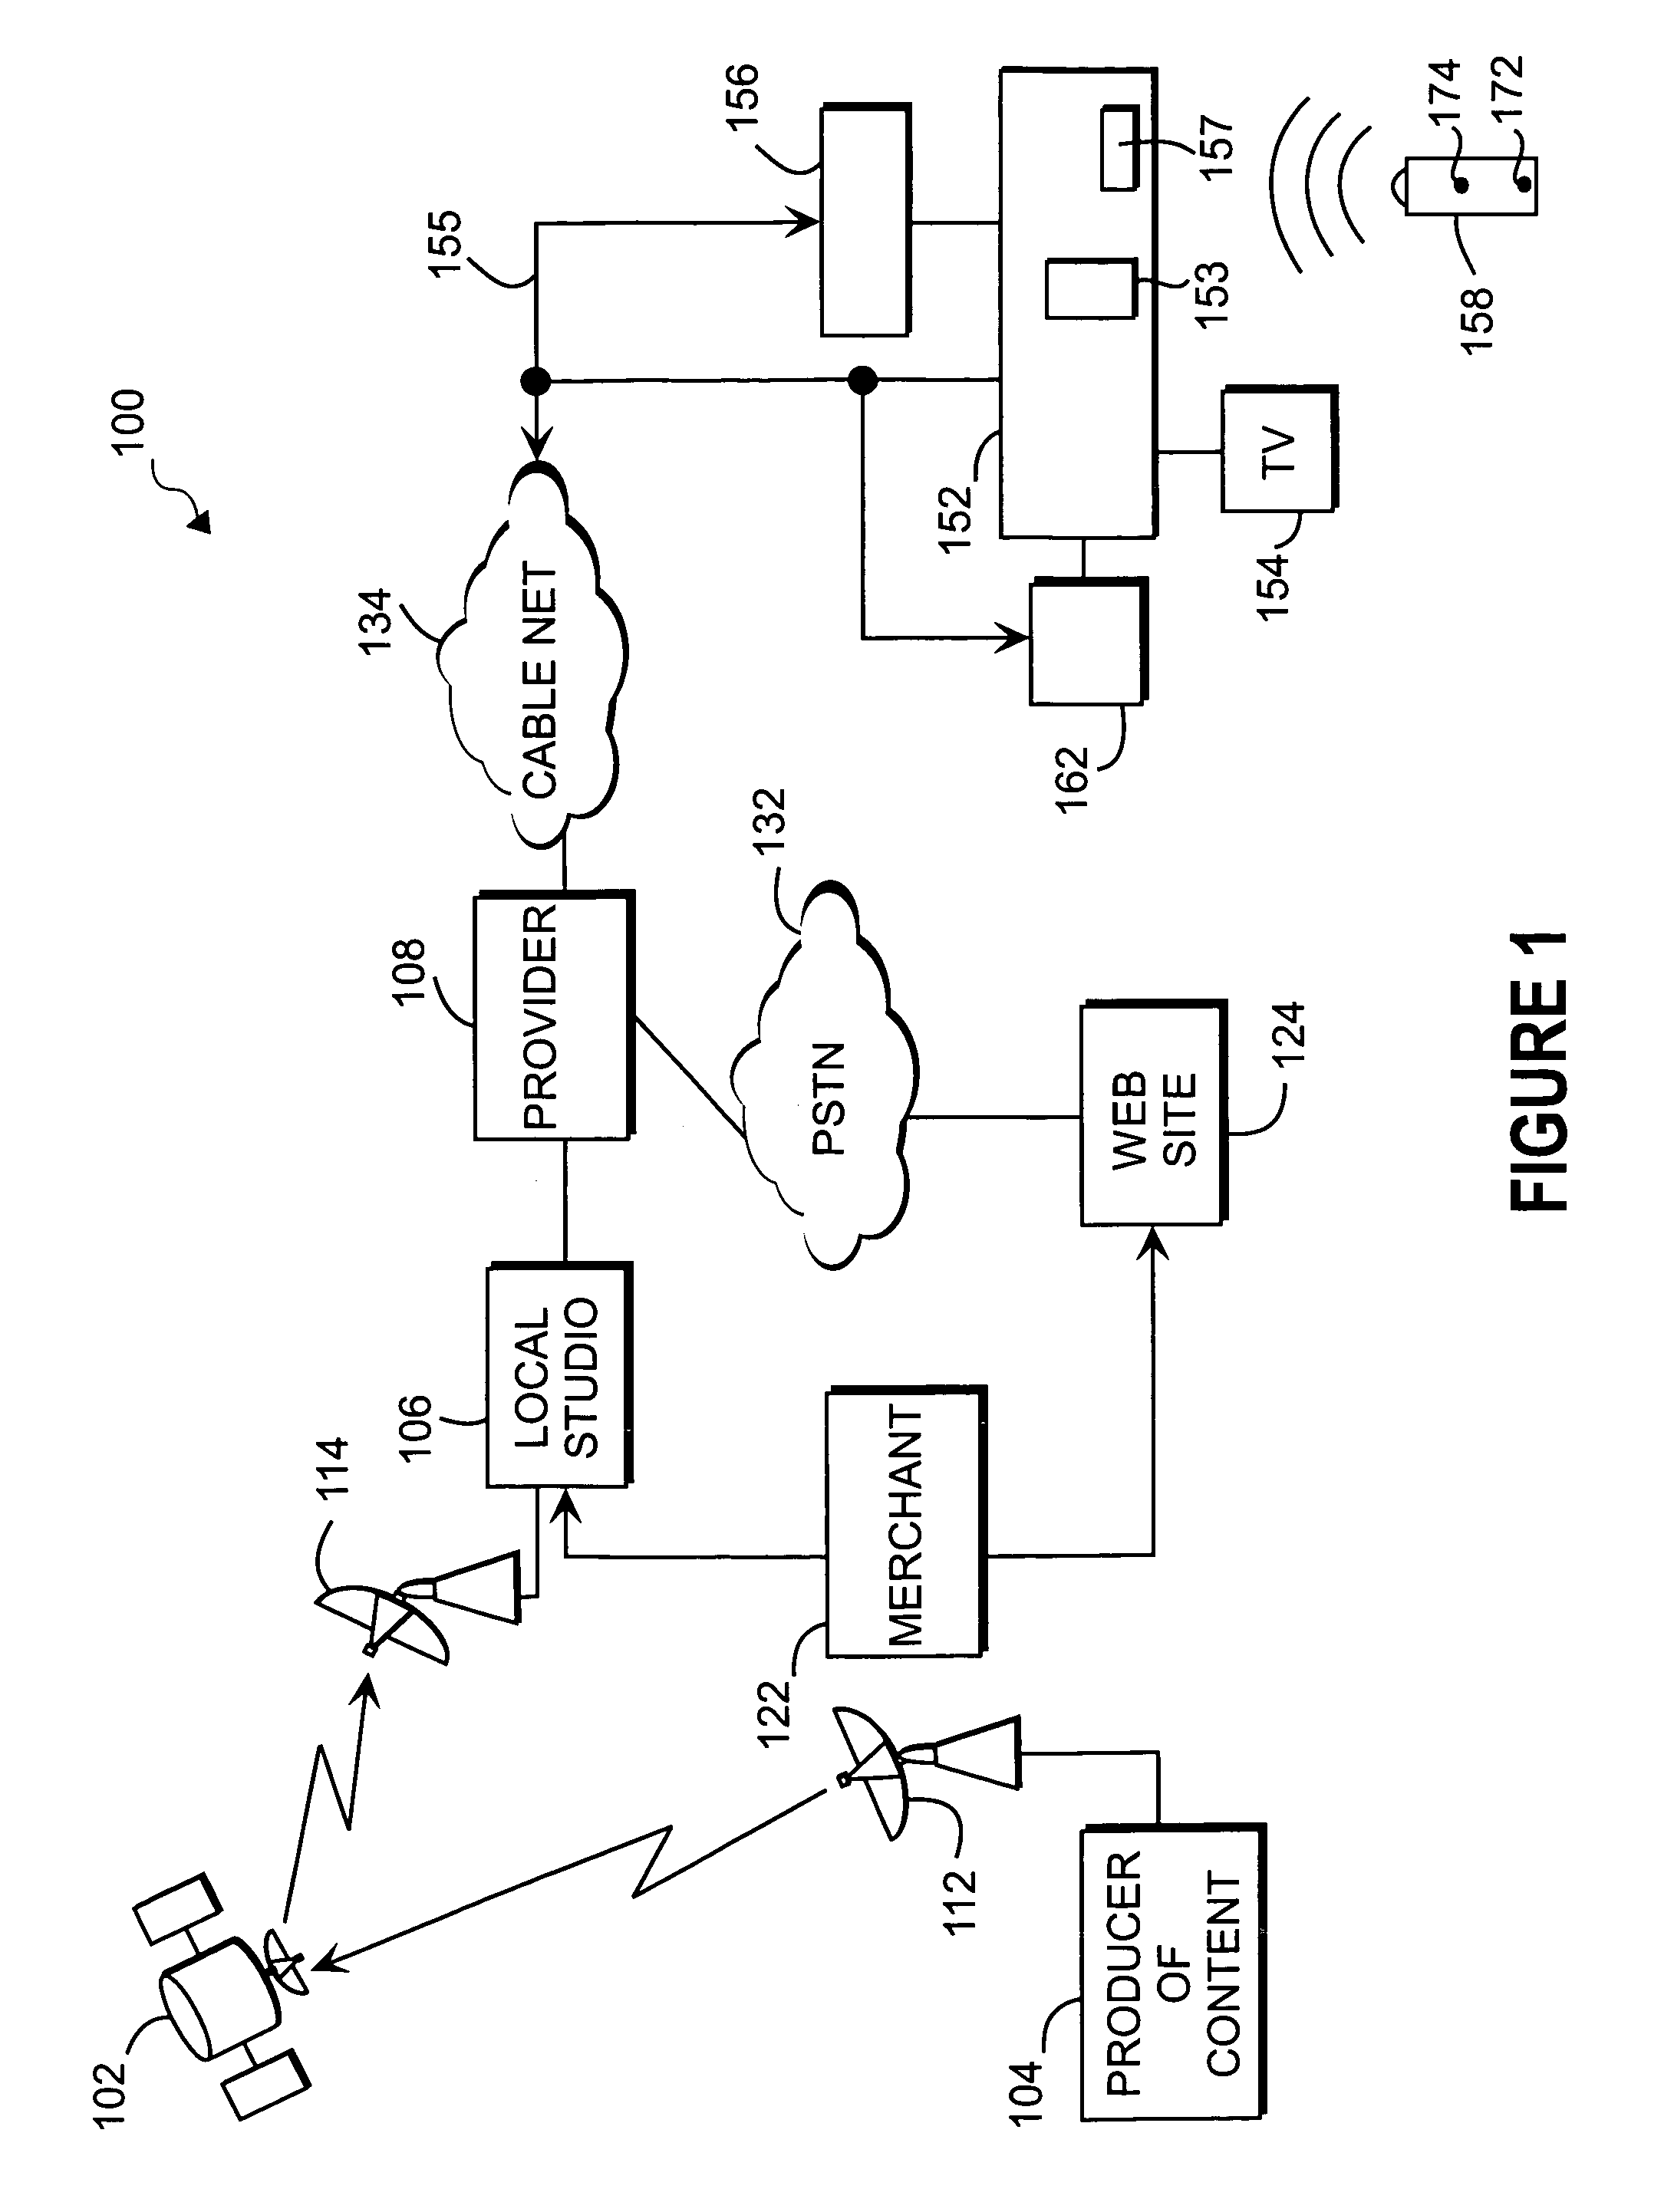 Method and system to provide deals and promotions via an interactive video casting system